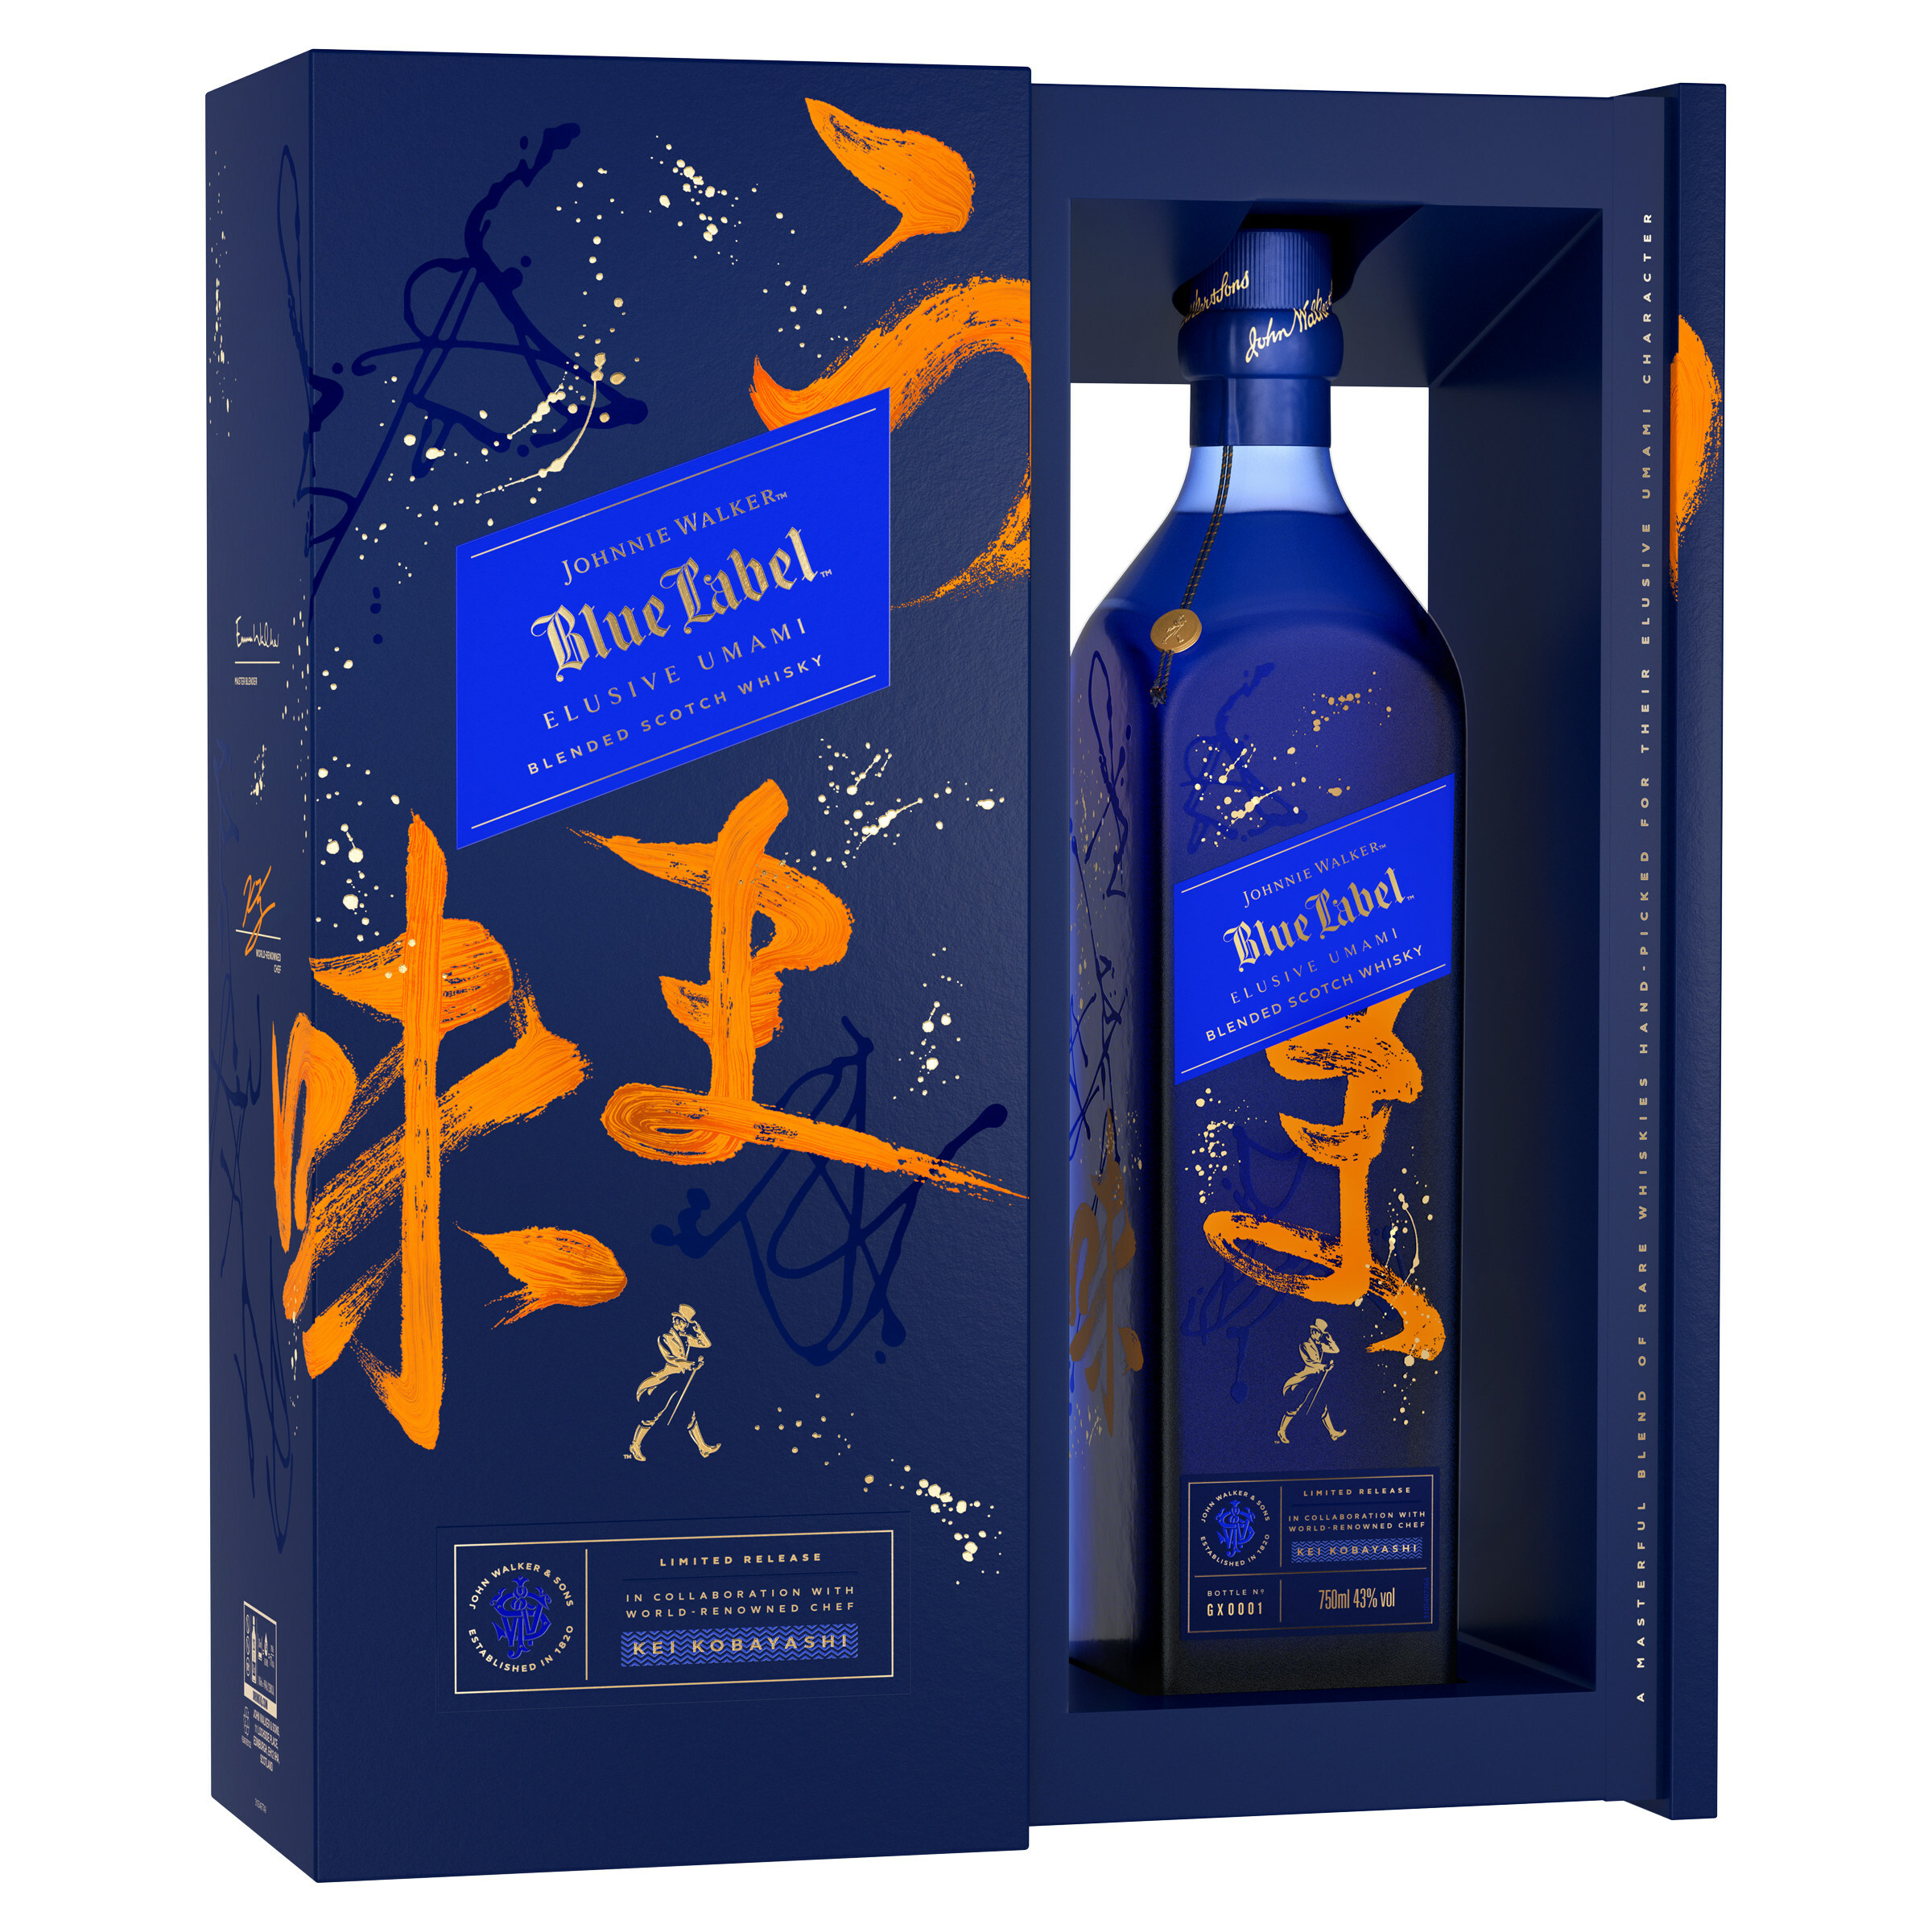 Johnnie Walker Reveals New Limited Edition with Chef to Explore Umami